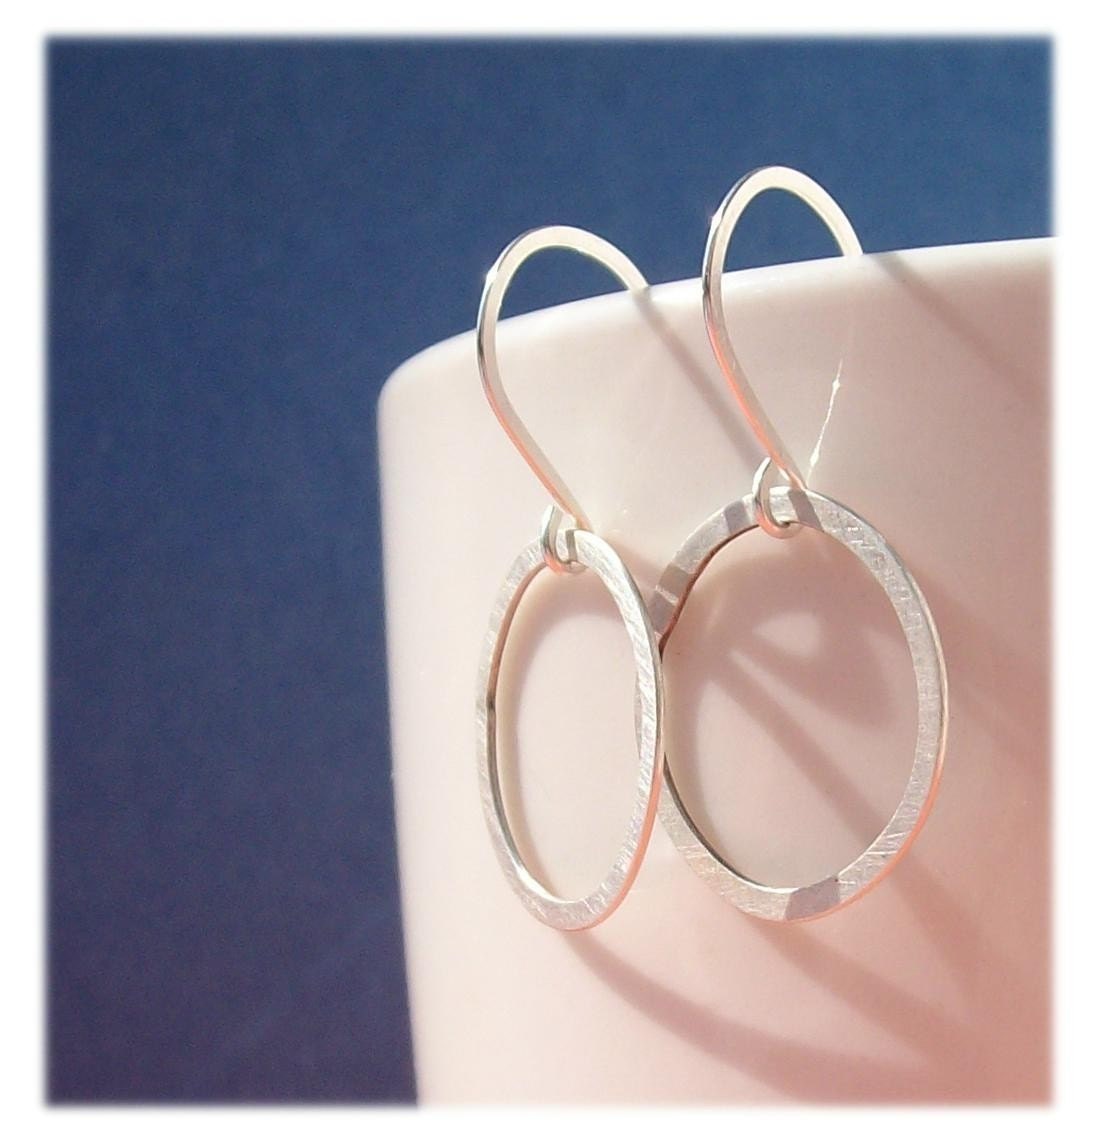 jewelry, earrings, metalwork, metal, circle, hoop, sterling silver, brushed, pawandclawdesigns, free shipping, earring, small, round, jewellery